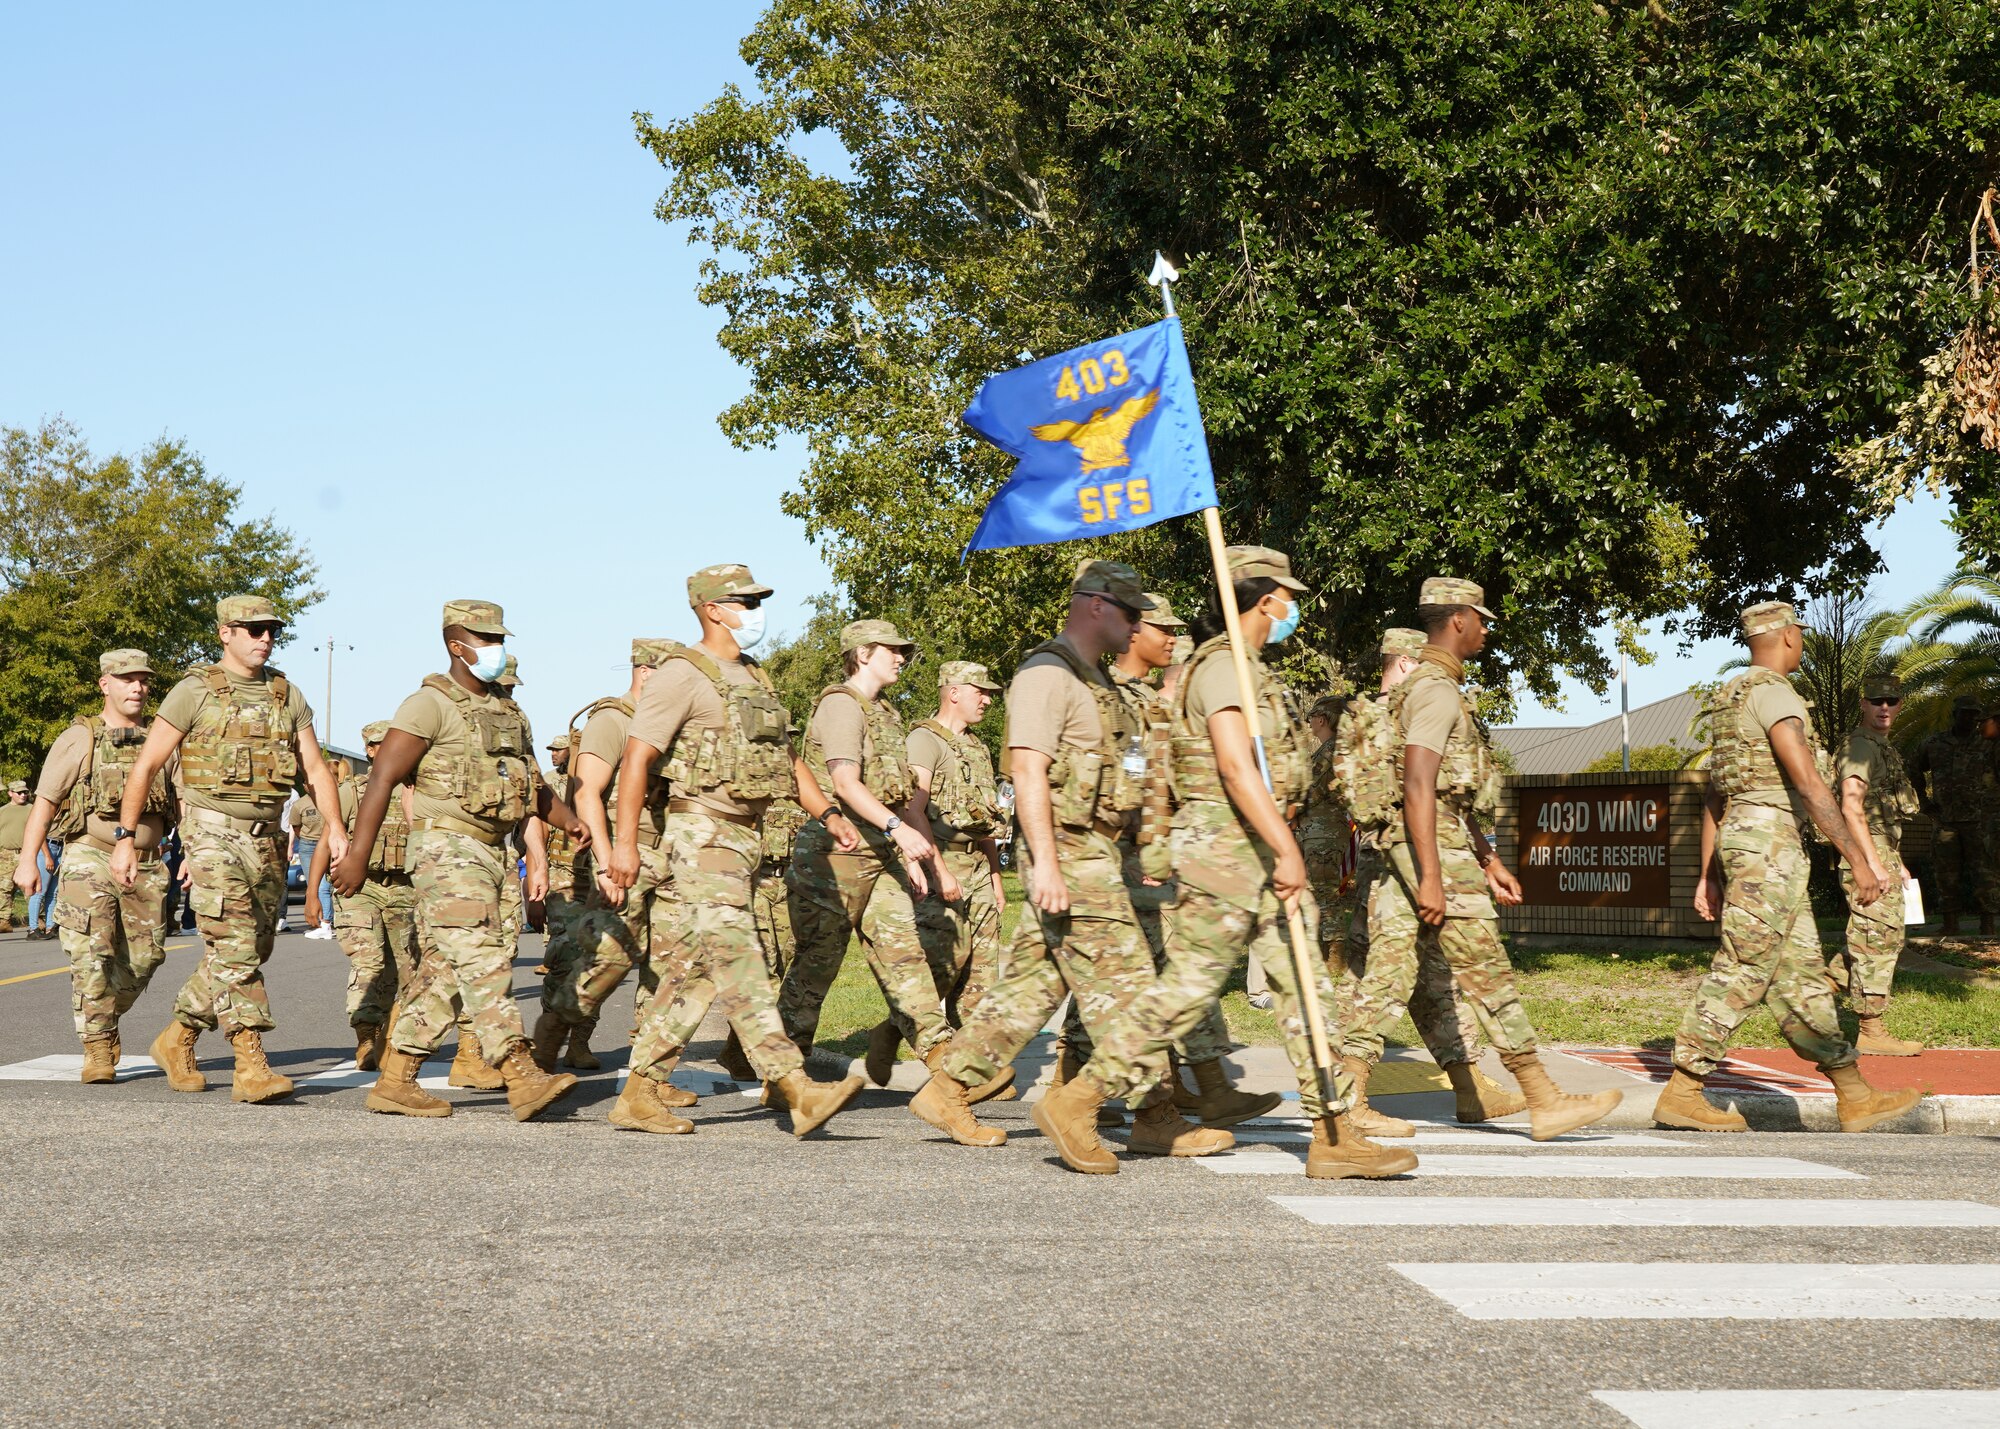 The 403rd Wing hosted a 20th Anniversary 9/11 Memorial Ruck March in rembrance of those who lost their lives during the events of 9/11. The march was led by the 403rd Security Forces Squadron and was open to all members of Keesler Air Force Base, both military and civilian. (U.S. Air Force photo by 2nd Lt. Christopher Carranza)